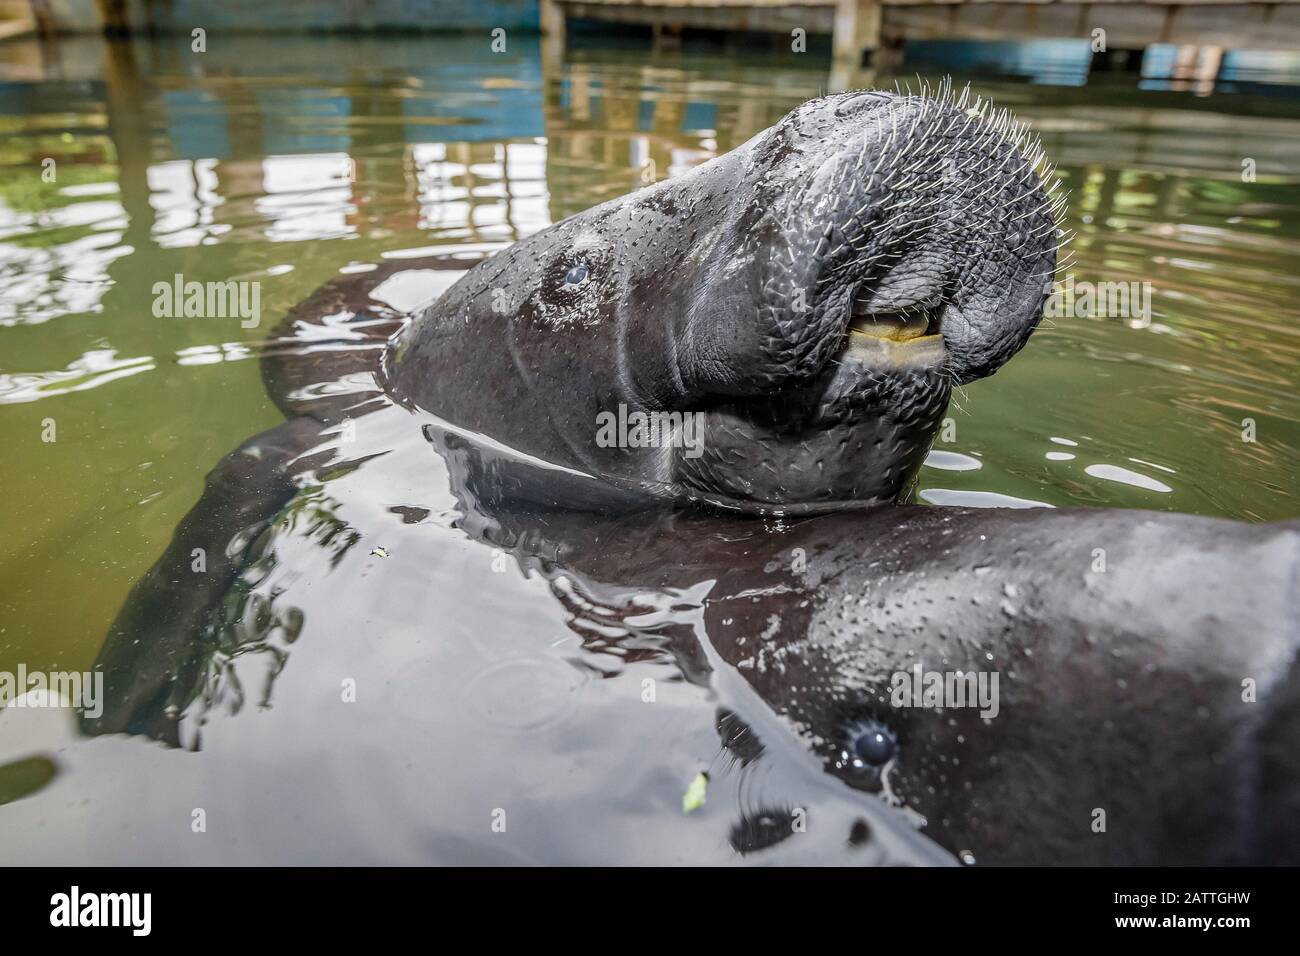 Captive Amazonian manatee, Trichechus inunguis, head detail at the Manatee Rescue Center, Iquitos, Loreto, Peru Stock Photo